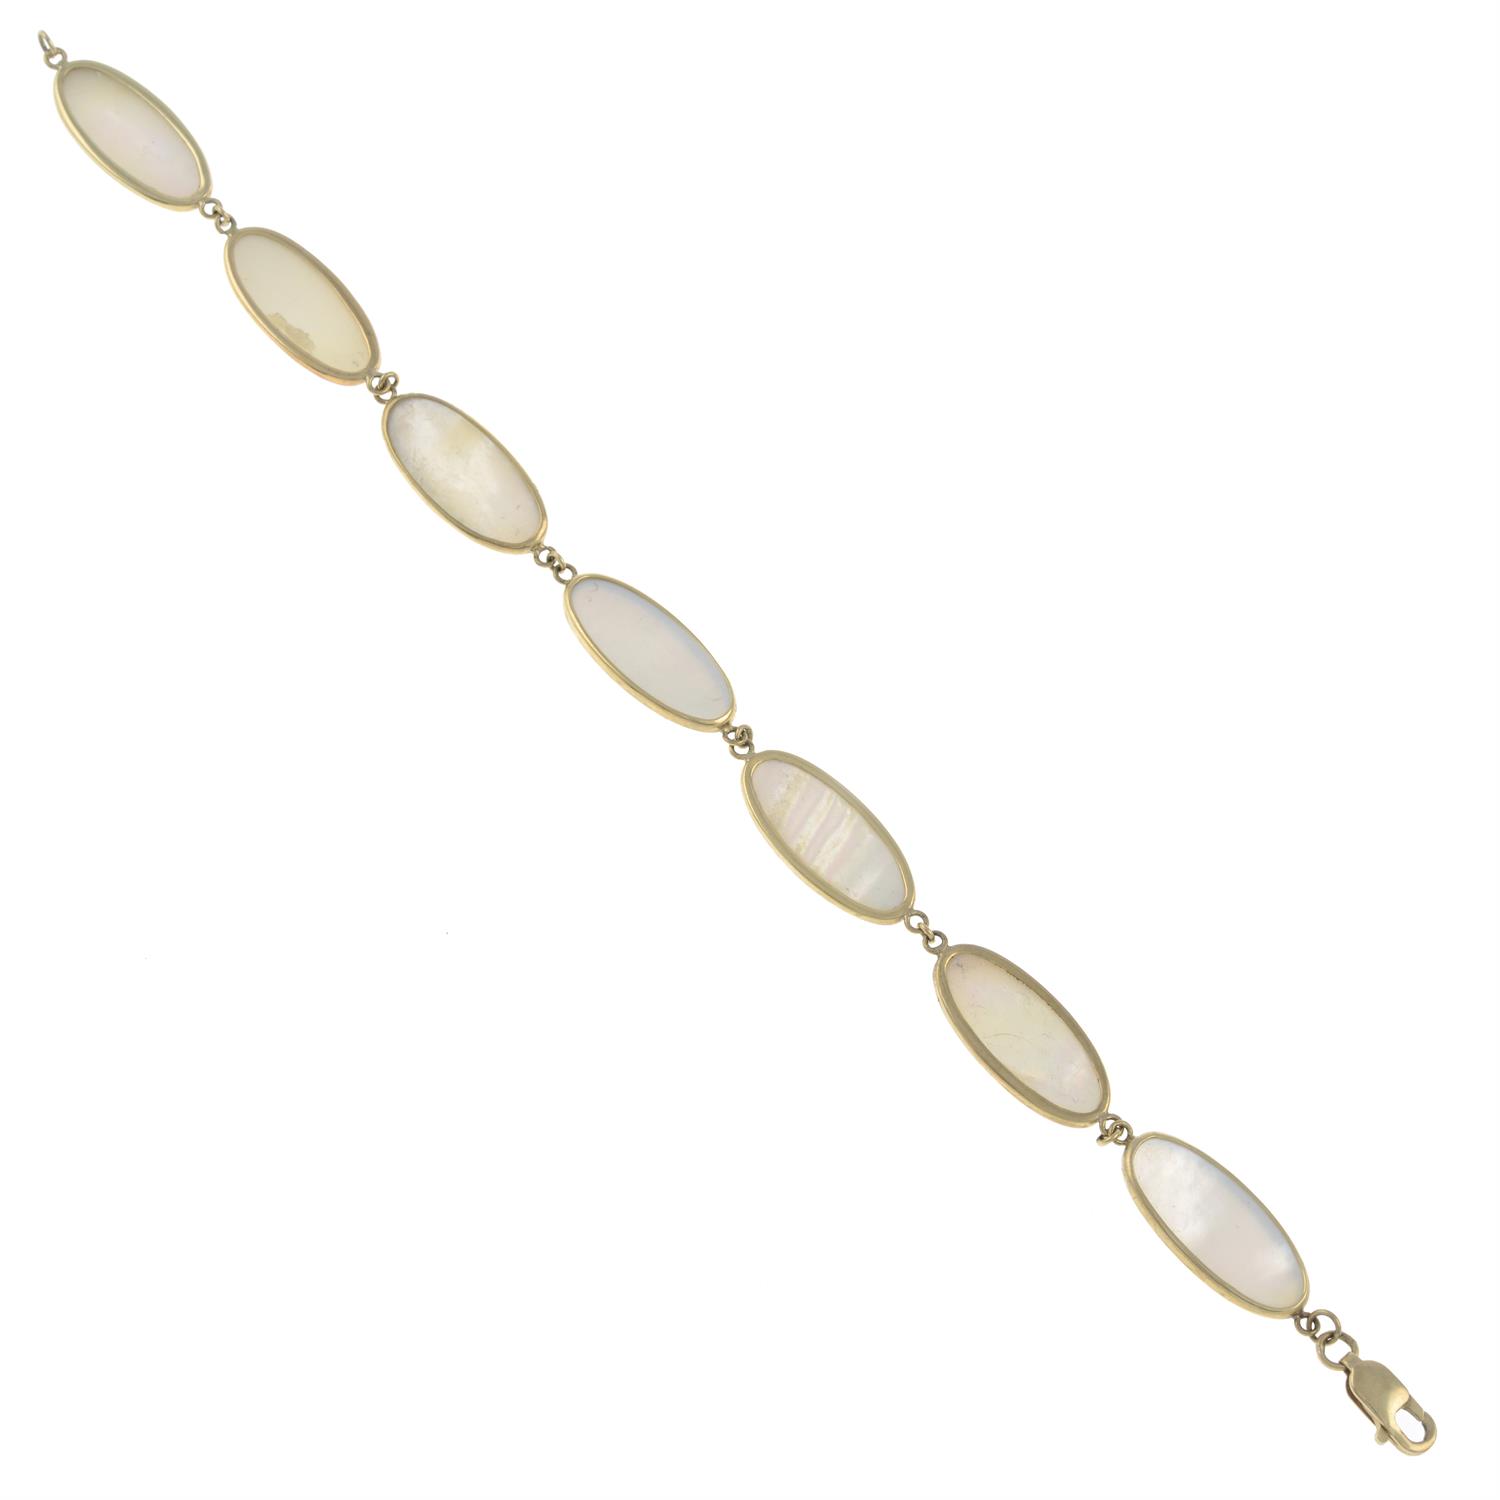 9ct gold mother-of-pearl bracelet - Image 2 of 2